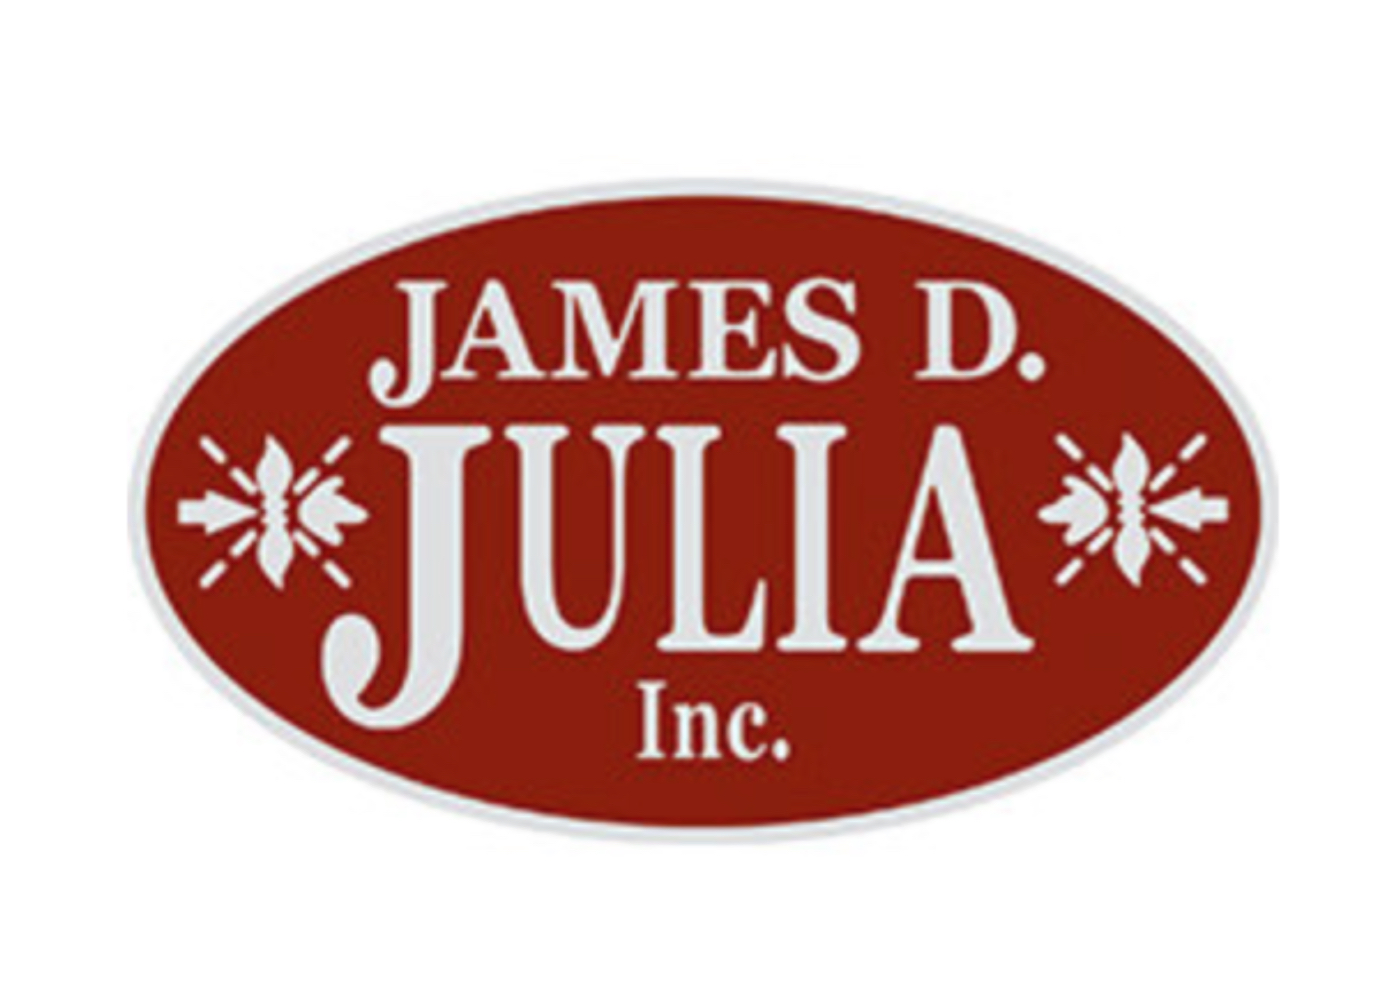 James D. Julia, a division of Morphy Auctions, located in Fairfield, ME and Woburn, MA.